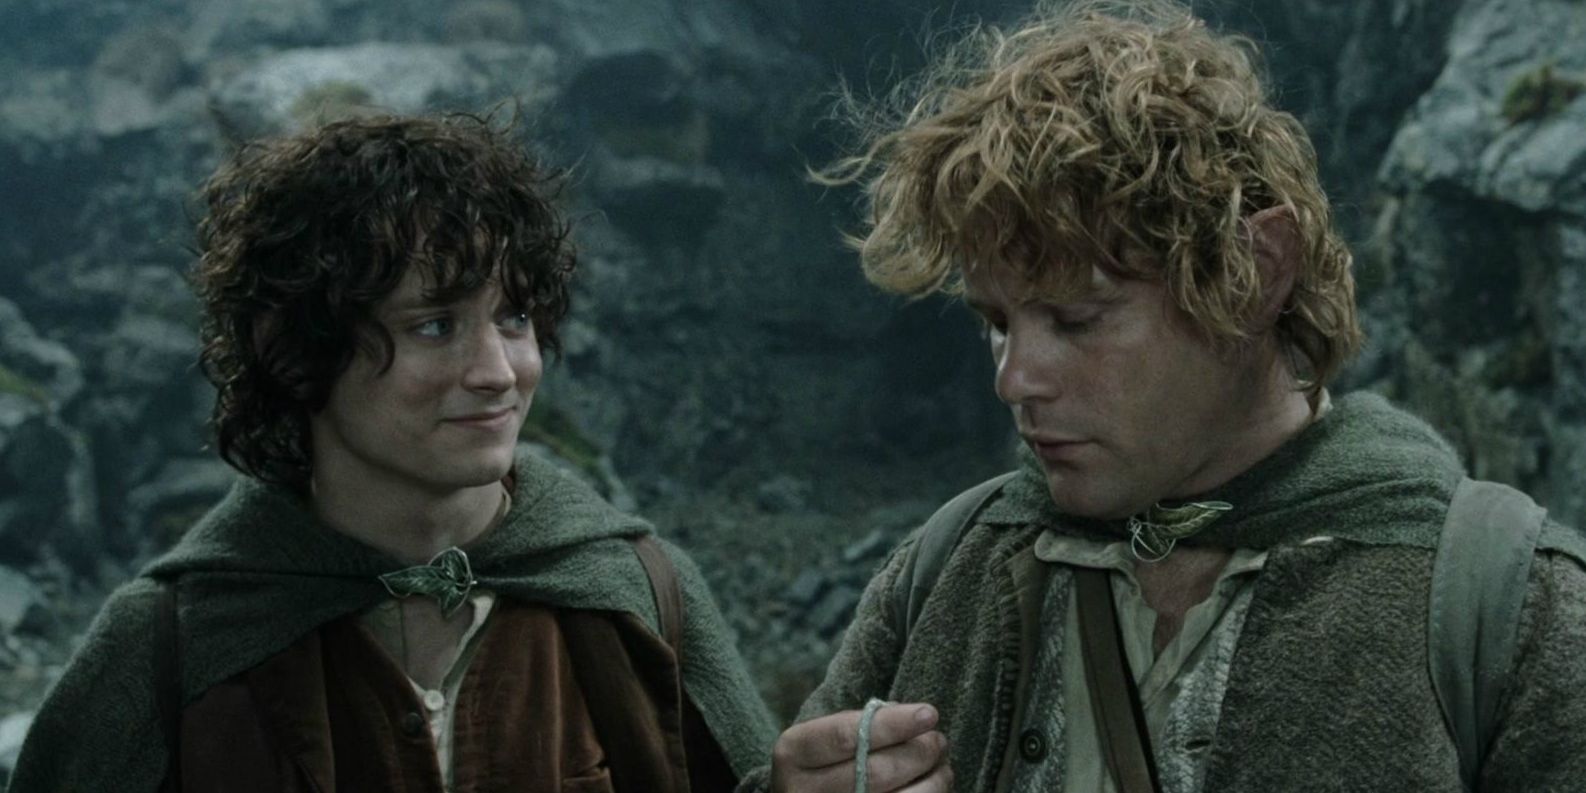 Frodo and Sam in the Two Towers Extended Edition